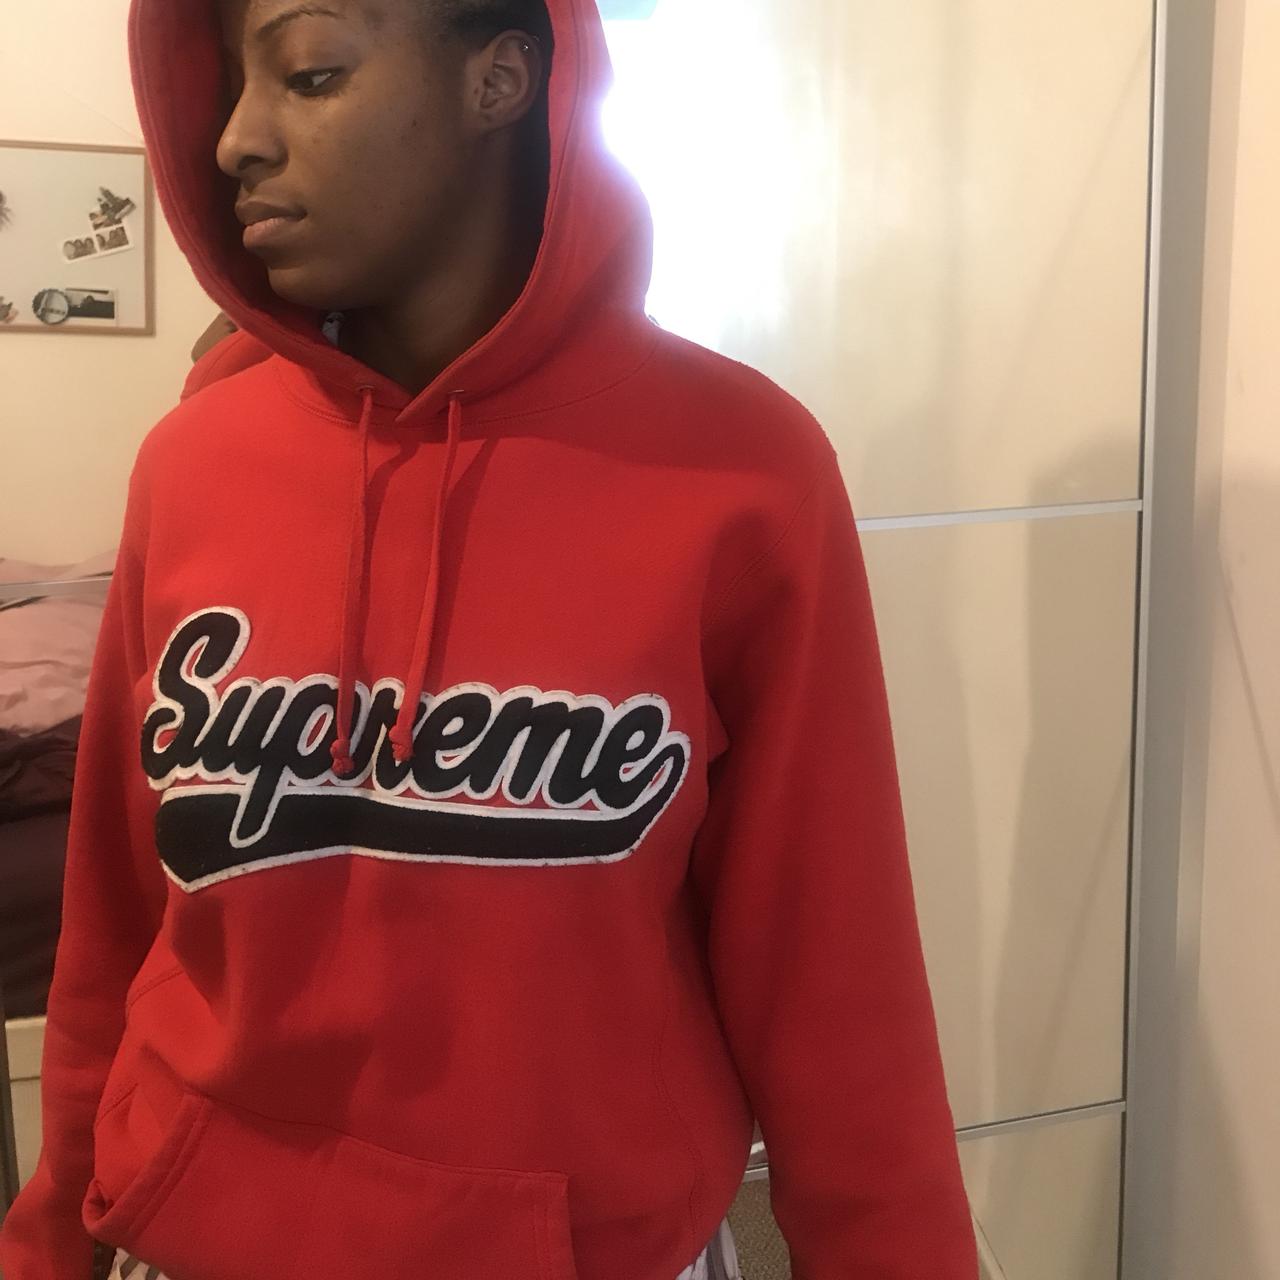 my local thrift is selling this tragic fake supreme hoodie for $120 🫠 :  r/Depop